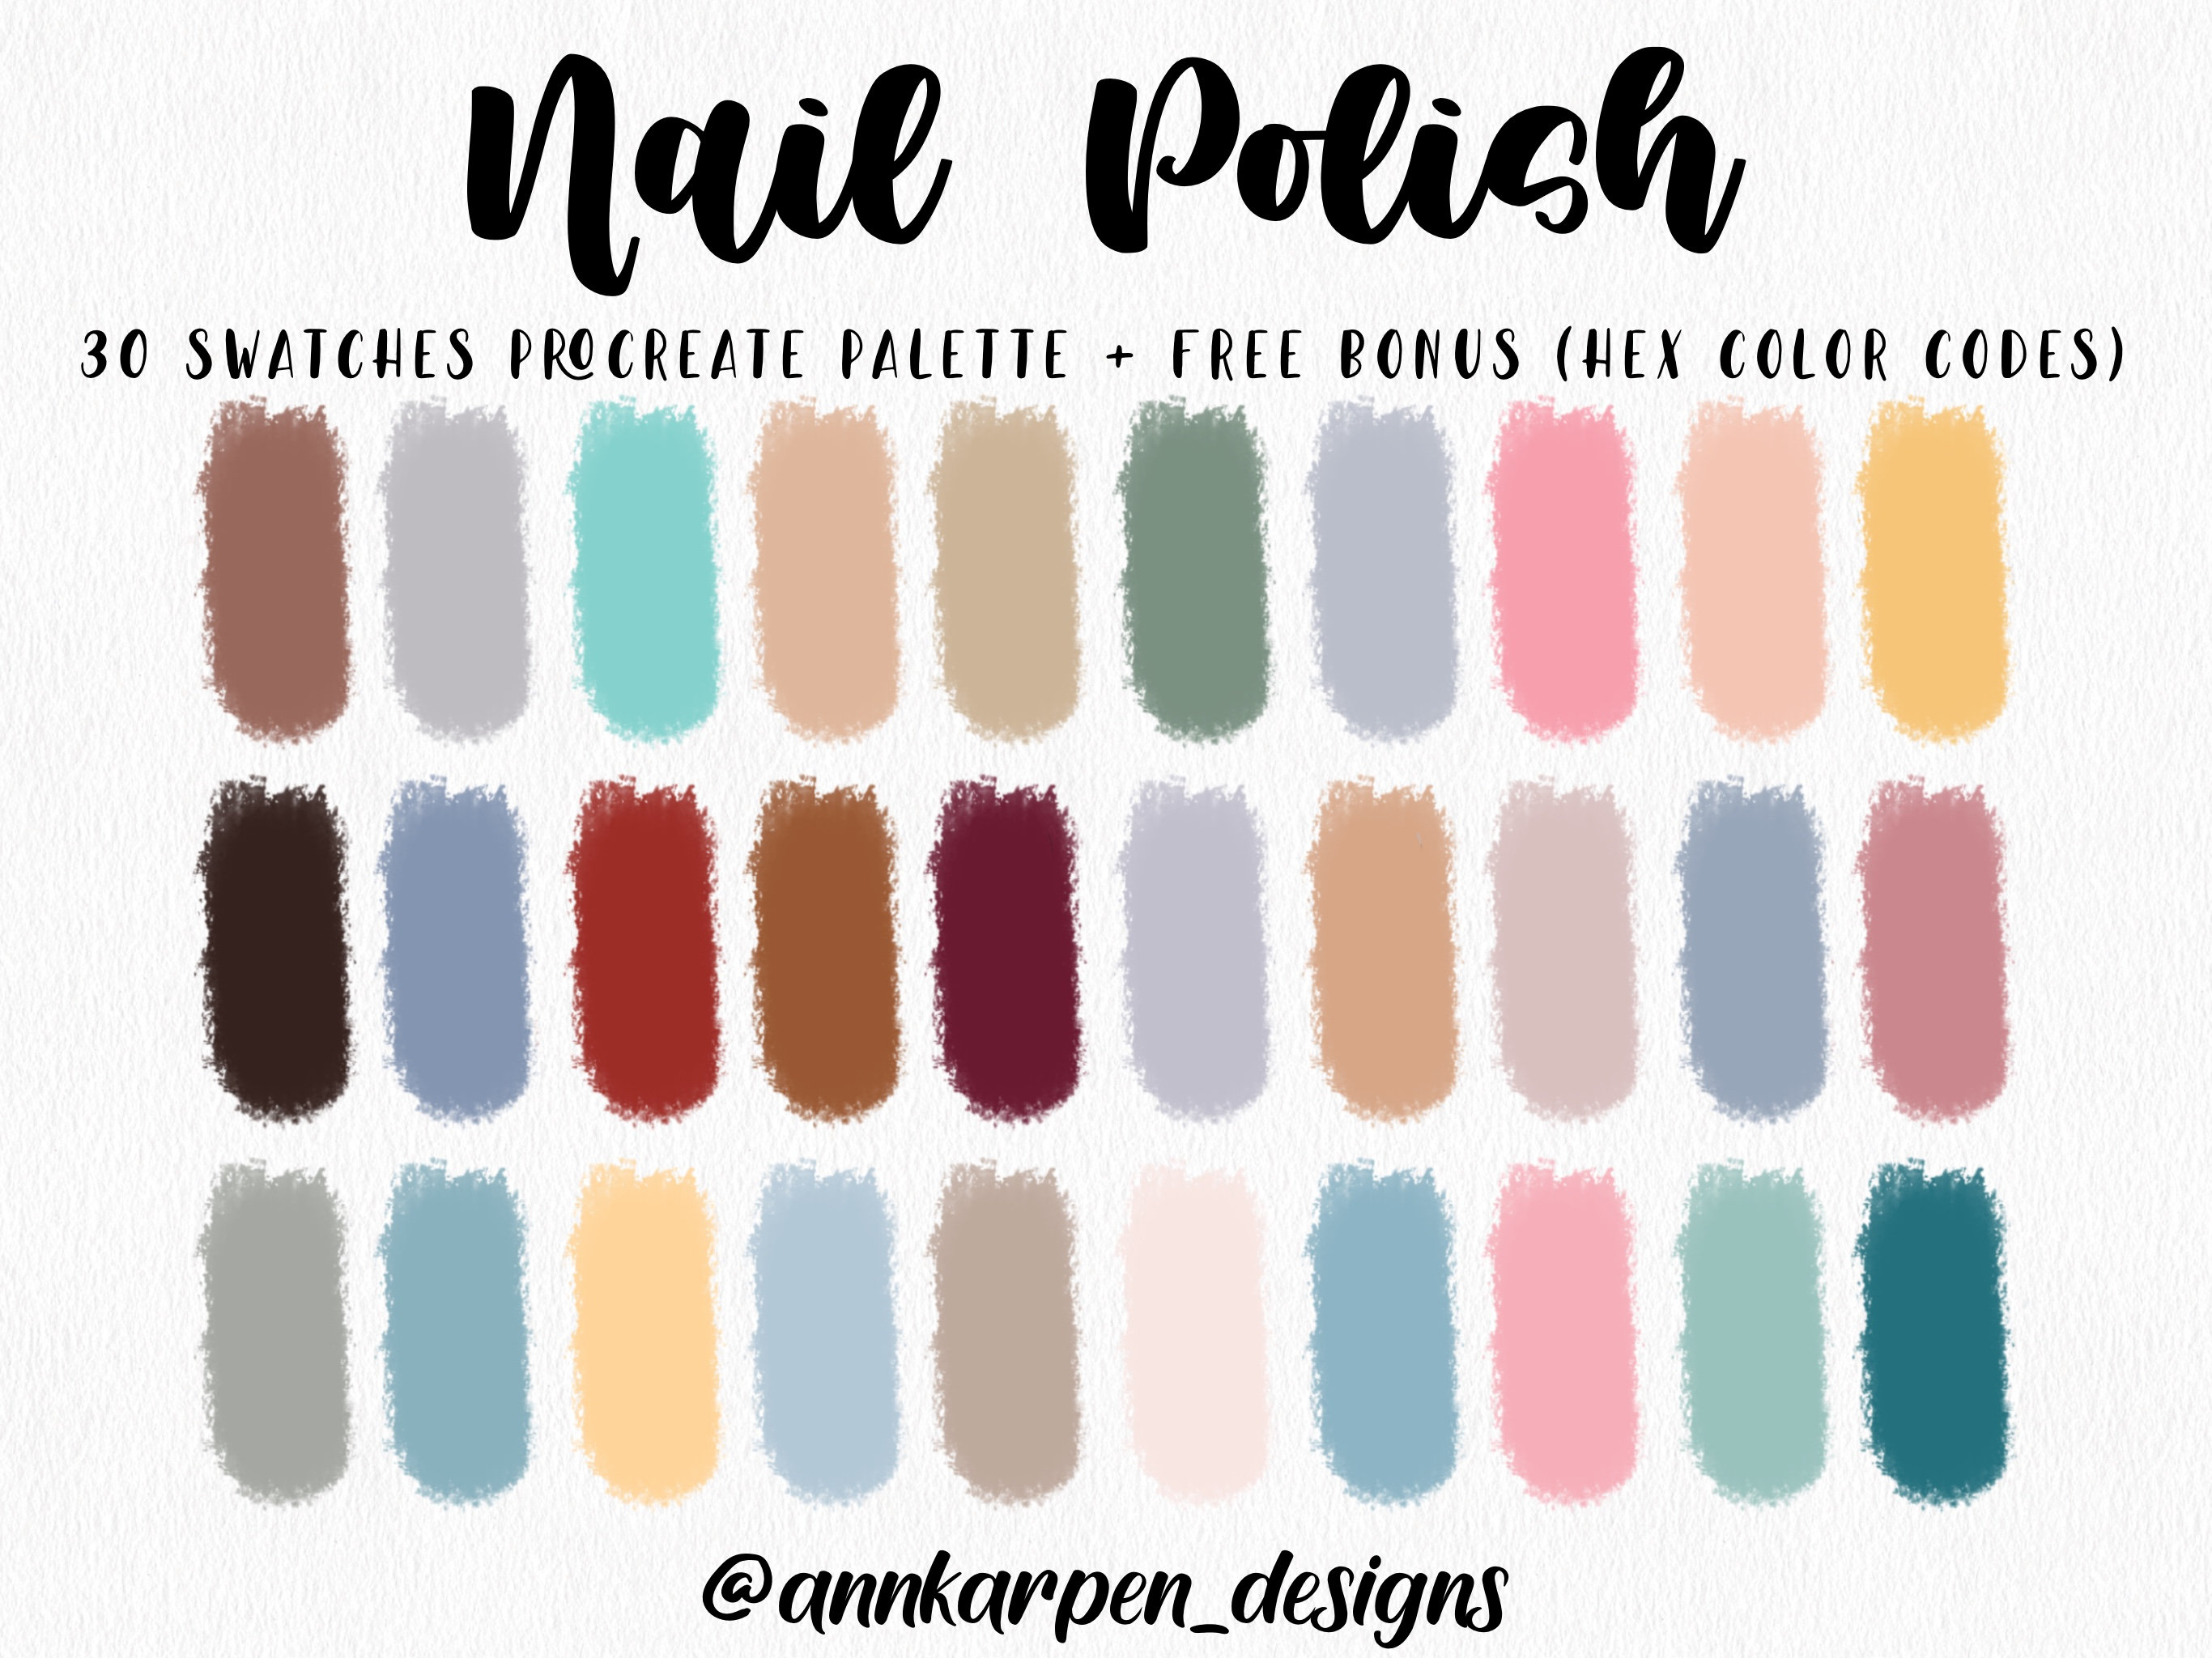 7. "2024 Spring Acrylic Nail Color Palette" - wide 6